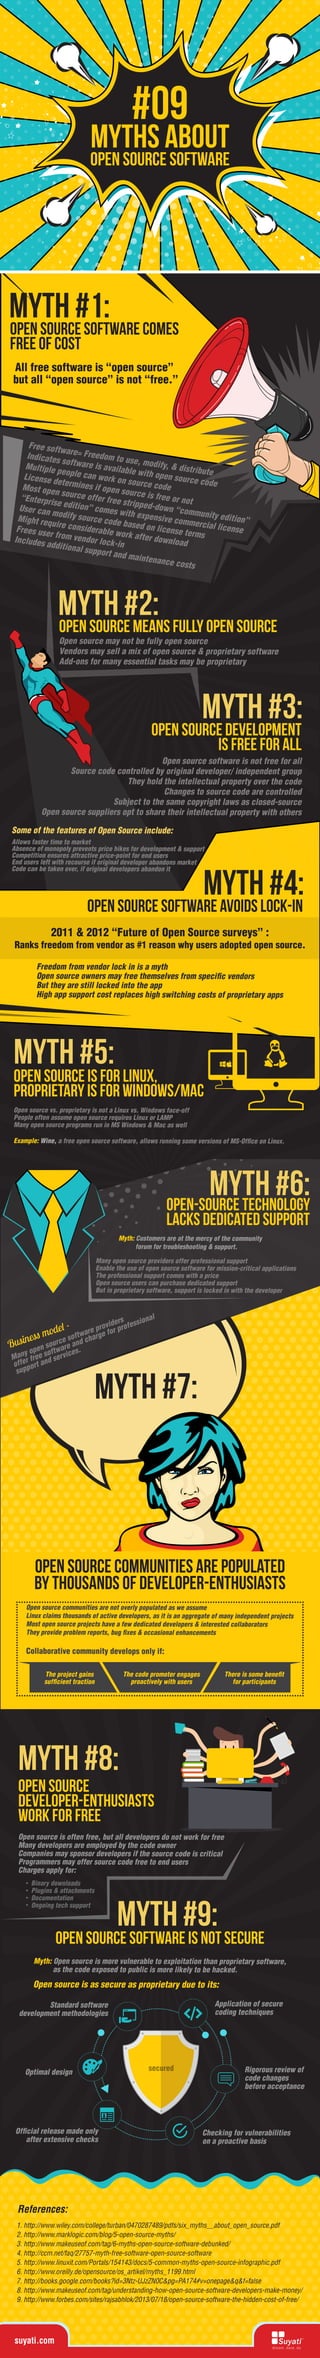 Myths About
Open source software
#09
References:
1. http://www.wiley.com/college/turban/0470287489/pdfs/six_myths__about_open_source.pdf
2. http://www.marklogic.com/blog/5-open-source-myths/
3. http://www.makeuseof.com/tag/6-myths-open-source-software-debunked/
4. http://ccm.net/faq/27757-myth-free-software-open-source-software
5. http://www.linuxit.com/Portals/154143/docs/5-common-myths-open-source-infographic.pdf
6. http://www.oreilly.de/opensource/os_artikel/myths_1199.html
7. http://books.google.com/books?id=3Ntz-UJzZN0C&pg=PA174#v=onepage&q&f=false
8. http://www.makeuseof.com/tag/understanding-how-open-source-software-developers-make-money/
9. http://www.forbes.com/sites/rajsabhlok/2013/07/18/open-source-software-the-hidden-cost-of-free/
suyati.com
Myth #1:Open Source Software Comes
Free of Cost
Myth #2:Open Source Means Fully Open Source
Myth #3:Open Source Development
is Free for All
Myth #4:Open Source Software avoids Lock-In
All free software is “open source”
but all “open source” is not “free.”
2011 & 2012 “Future of Open Source surveys” :
Ranks freedom from vendor as #1 reason why users adopted open source.
Myth #5:
Myth #6:
Open Source is for Linux,
Proprietary is for Windows/Mac
Open-Source Technology
lacks dedicated support
Myth #8:
Open Source
Developer-Enthusiasts
Work for Free
Open Source software is not secure
Business model -
Many open source software providers
offer free software and charge for professional
support and services.
Free software= Freedom to use, modify, & distribute
Indicates software is available with open source code
Multiple people can work on source code
License determines if open source is free or not
Most open source offer free stripped-down “community edition”
“Enterprise edition” comes with expensive commercial license
User can modify source code based on license terms
Might require considerable work after download
Frees user from vendor lock-in
Includes additional support and maintenance costs
Open source may not be fully open source
Vendors may sell a mix of open source & proprietary software
Add-ons for many essential tasks may be proprietary
Open source software is not free for all
Source code controlled by original developer/ independent group
They hold the intellectual property over the code
Changes to source code are controlled
Subject to the same copyright laws as closed-source
Open source suppliers opt to share their intellectual property with others
Allows faster time to market
Absence of monopoly prevents price hikes for development & support
Competition ensures attractive price-point for end users
End users left with recourse if original developer abandons market
Code can be taken over, if original developers abandon it
Freedom from vendor lock in is a myth
Open source owners may free themselves from speciﬁc vendors
But they are still locked into the app
High app support cost replaces high switching costs of proprietary apps
Open source vs. proprietary is not a Linux vs. Windows face-off
People often assume open source requires Linux or LAMP
Many open source programs run in MS Windows & Mac as well
Many open source providers offer professional support
Enable the use of open source software for mission-critical applications
The professional support comes with a price
Open source users can purchase dedicated support
But in proprietary software, support is locked in with the developer
Open source communities are not overly populated as we assume
Linux claims thousands of active developers, as it is an aggregate of many independent projects
Most open source projects have a few dedicated developers & interested collaborators
They provide problem reports, bug ﬁxes & occasional enhancements
Open source is often free, but all developers do not work for free
Many developers are employed by the code owner
Companies may sponsor developers if the source code is critical
Programmers may offer source code free to end users
Charges apply for:
Myth: Open source is more vulnerable to exploitation than proprietary software,
as the code exposed to public is more likely to be hacked.
Open source is as secure as proprietary due to its:
Binary downloads
Plugins & attachments
Documentation
Ongoing tech support
Collaborative community develops only if:
Myth: Customers are at the mercy of the community
forum for troubleshooting & support.
Example: Wine, a free open source software, allows running some versions of MS-Ofﬁce on Linux.
Some of the features of Open Source include:
Myth #7:
Myth #9:
Open Source Communities are populated
by thousands of developer-enthusiasts
The project gains
sufﬁcient traction
The code promoter engages
proactively with users
There is some beneﬁt
for participants
secured
Optimal design
Standard software
development methodologies
Ofﬁcial release made only
after extensive checks
Application of secure
coding techniques
Rigorous review of
code changes
before acceptance
Checking for vulnerabilities
on a proactive basis
 